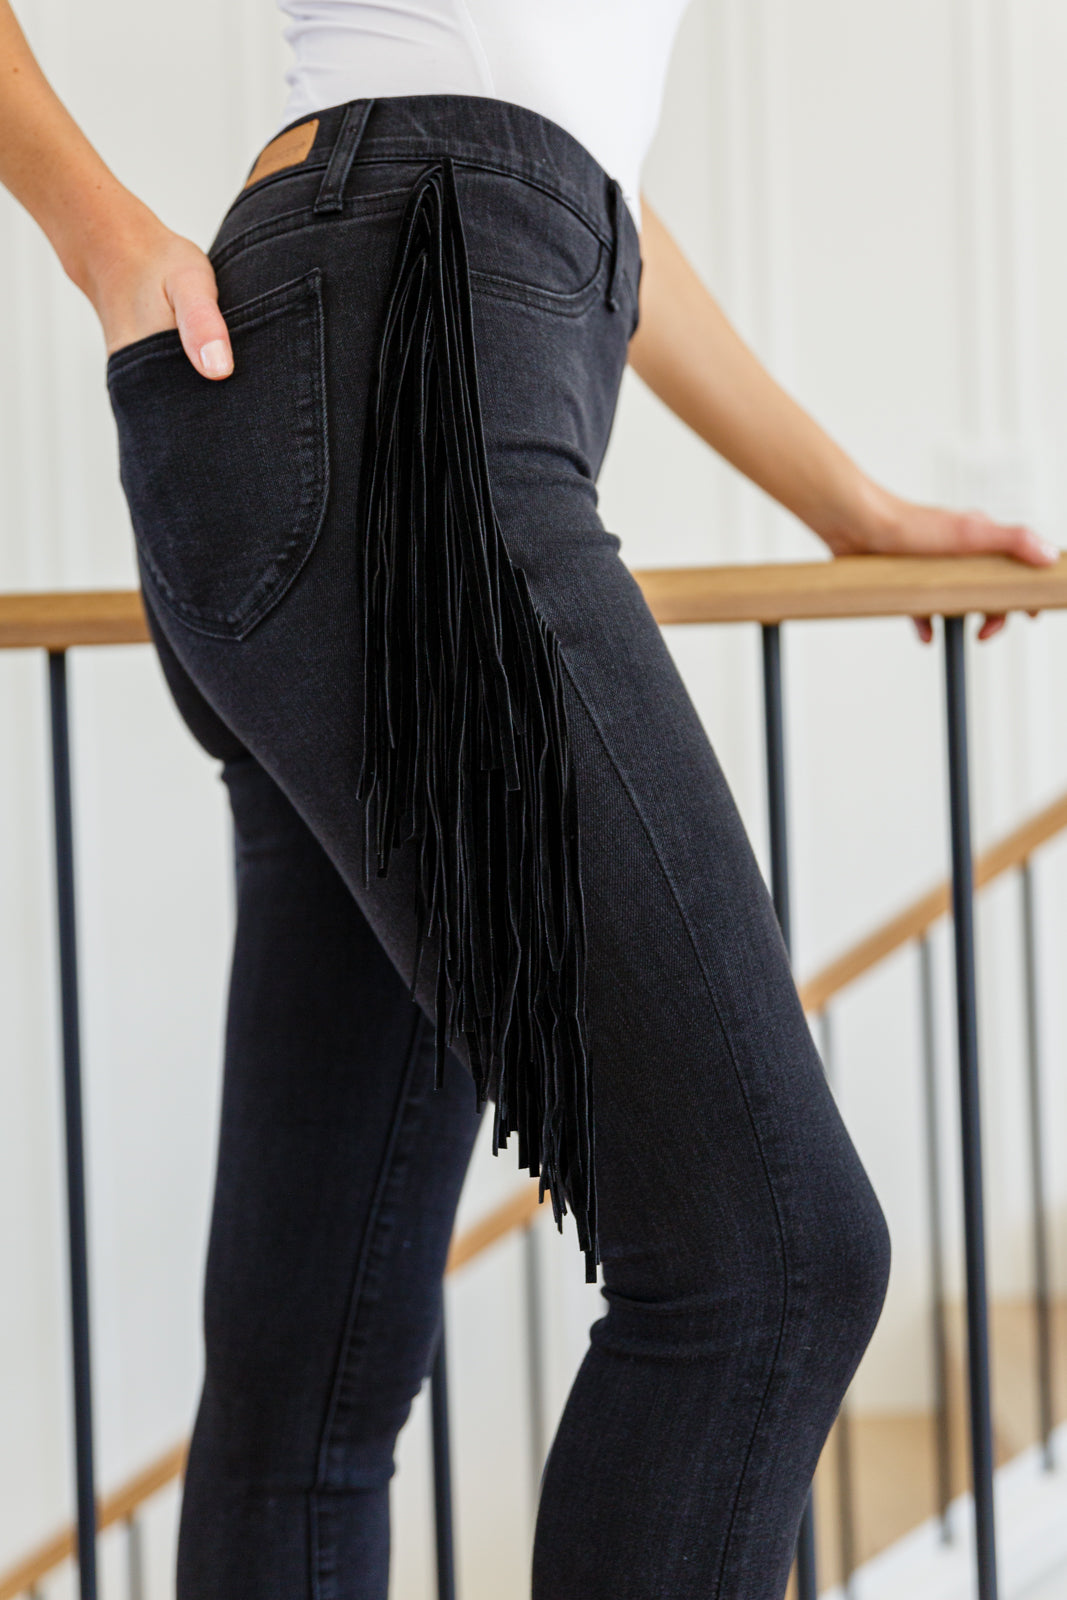 If there's anyone who can totally rock the Hilary Side Fringe Skinny Jegging In Black it's you! These western inspired jeggings feature a mid-rise waist with faux front pockets topping a skinny pant leg. Faux suede fringe decorates either side of these jeans adding a unique and stylish touch. Add cowboy boots and a crop top for a super fun look! 0 - 24W